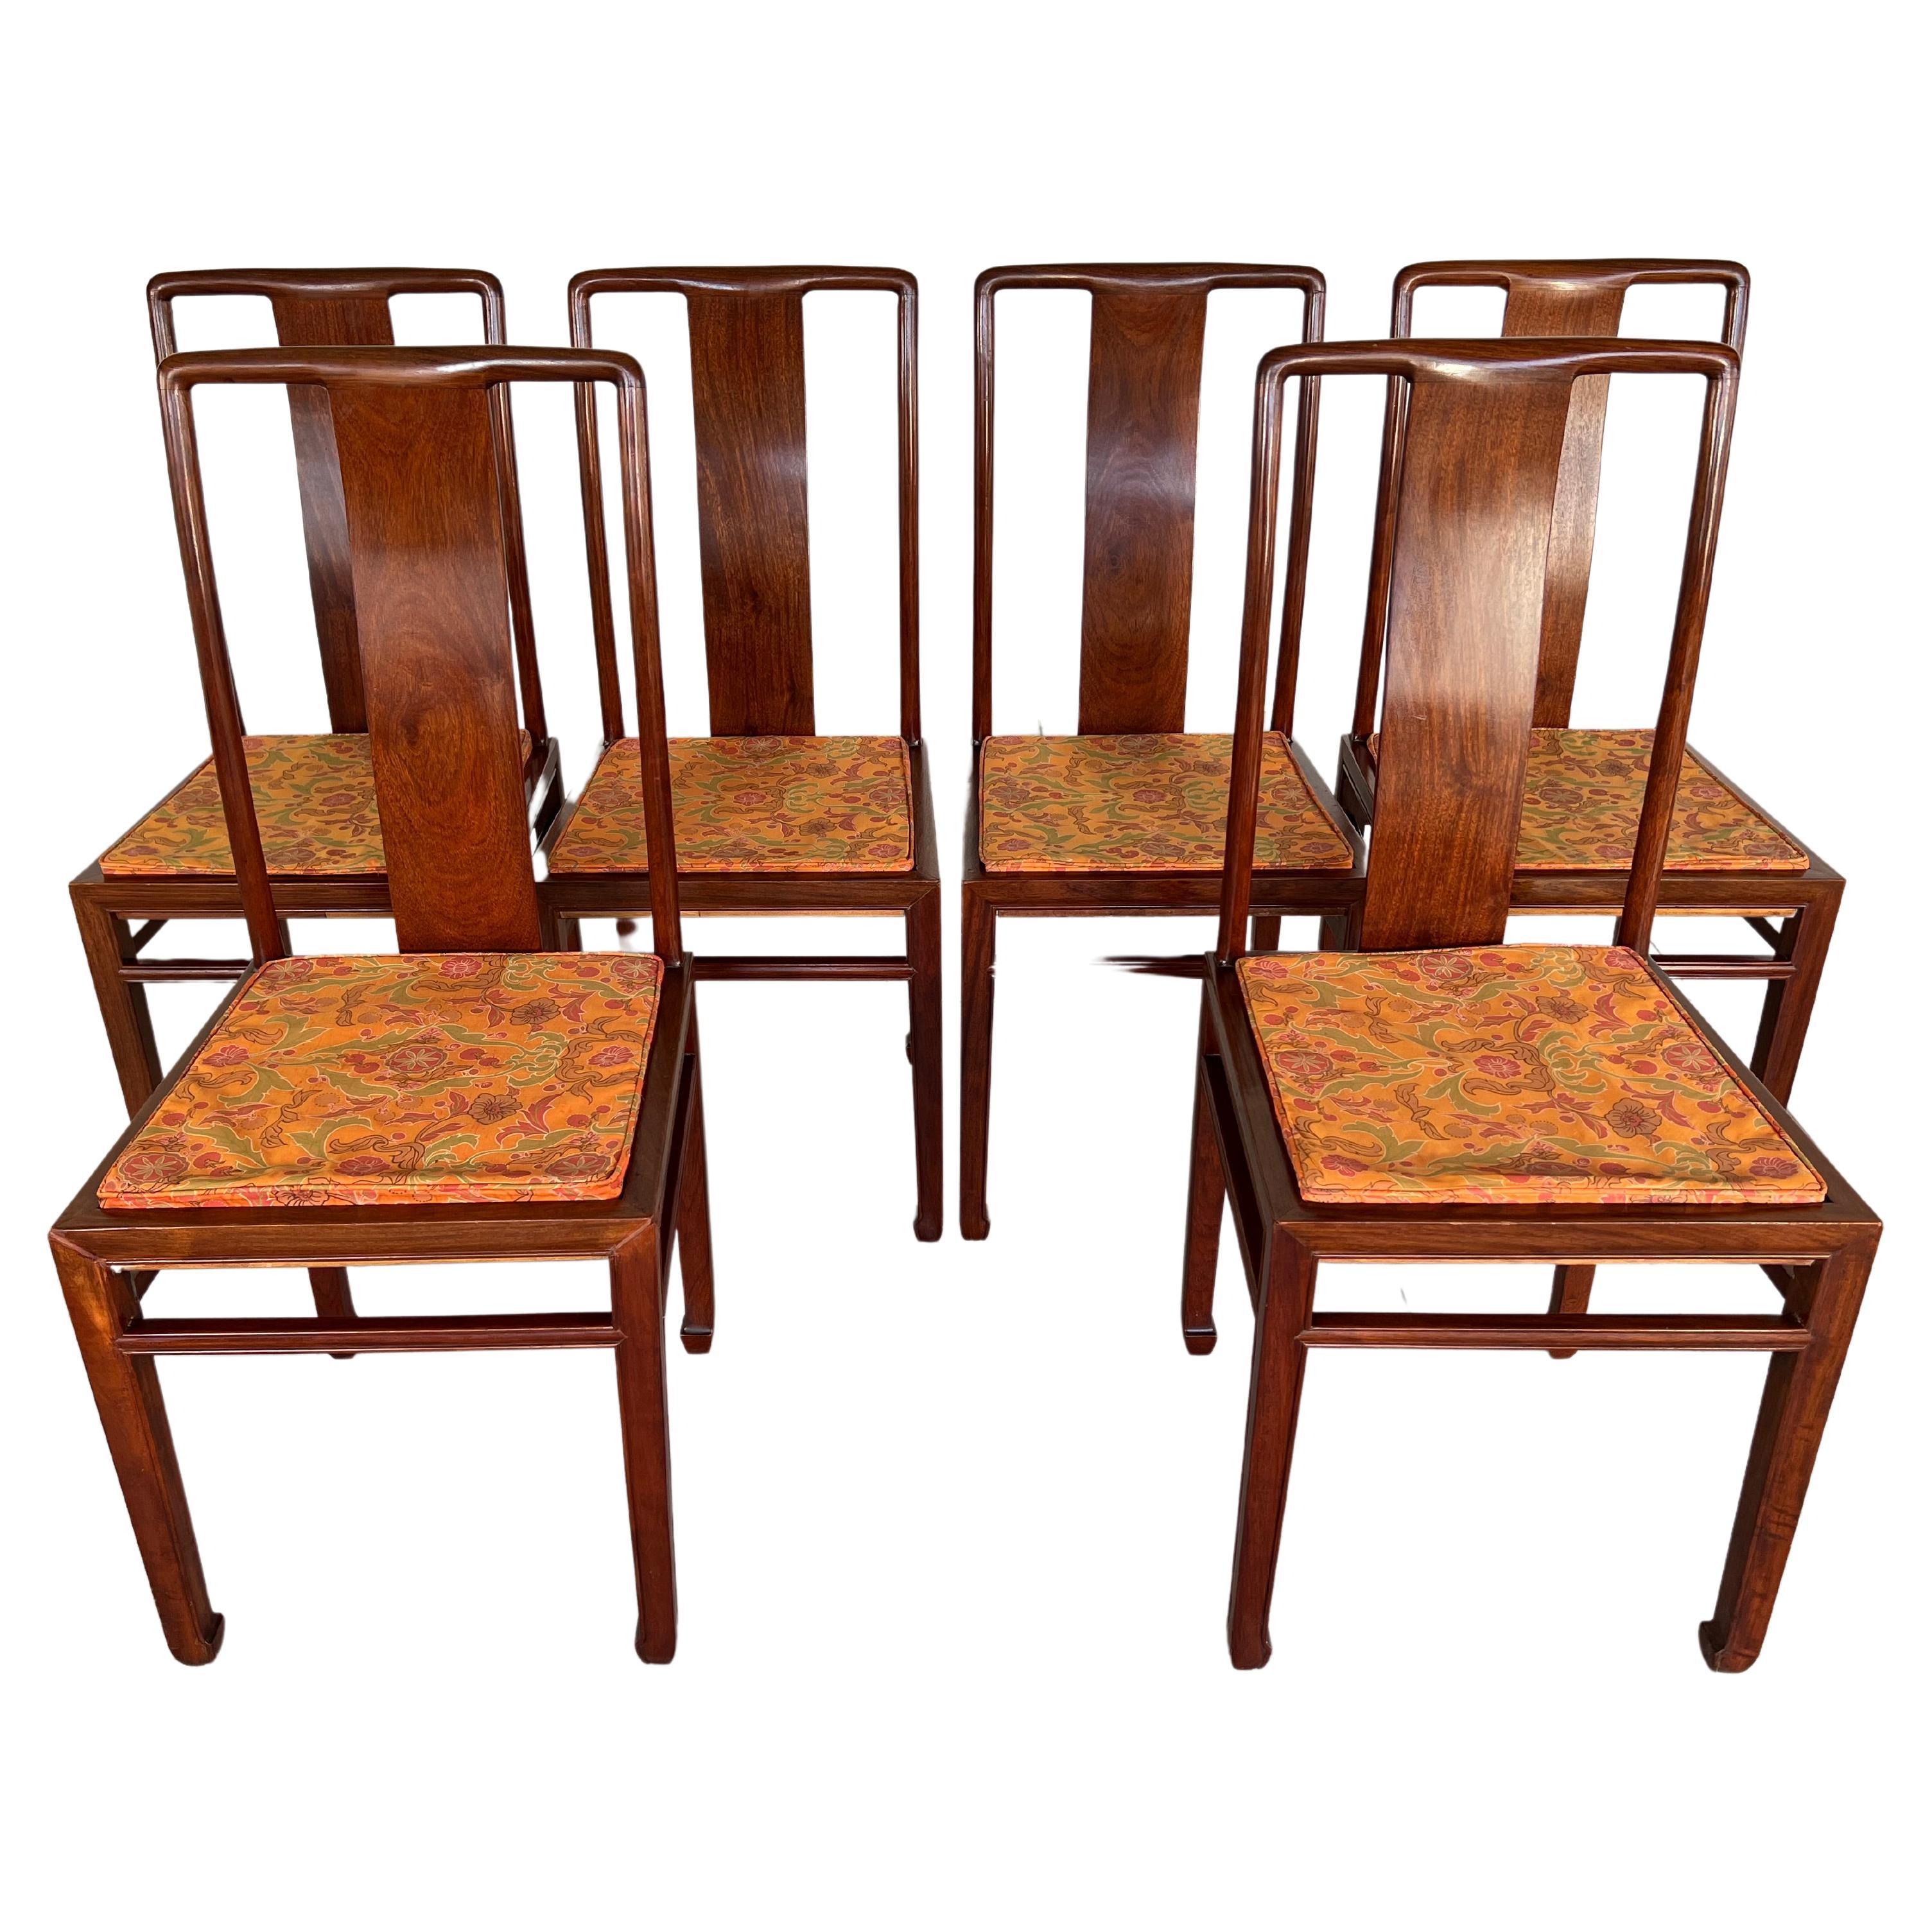 Vintage Chinoiserie Dining Chairs - Set of 6